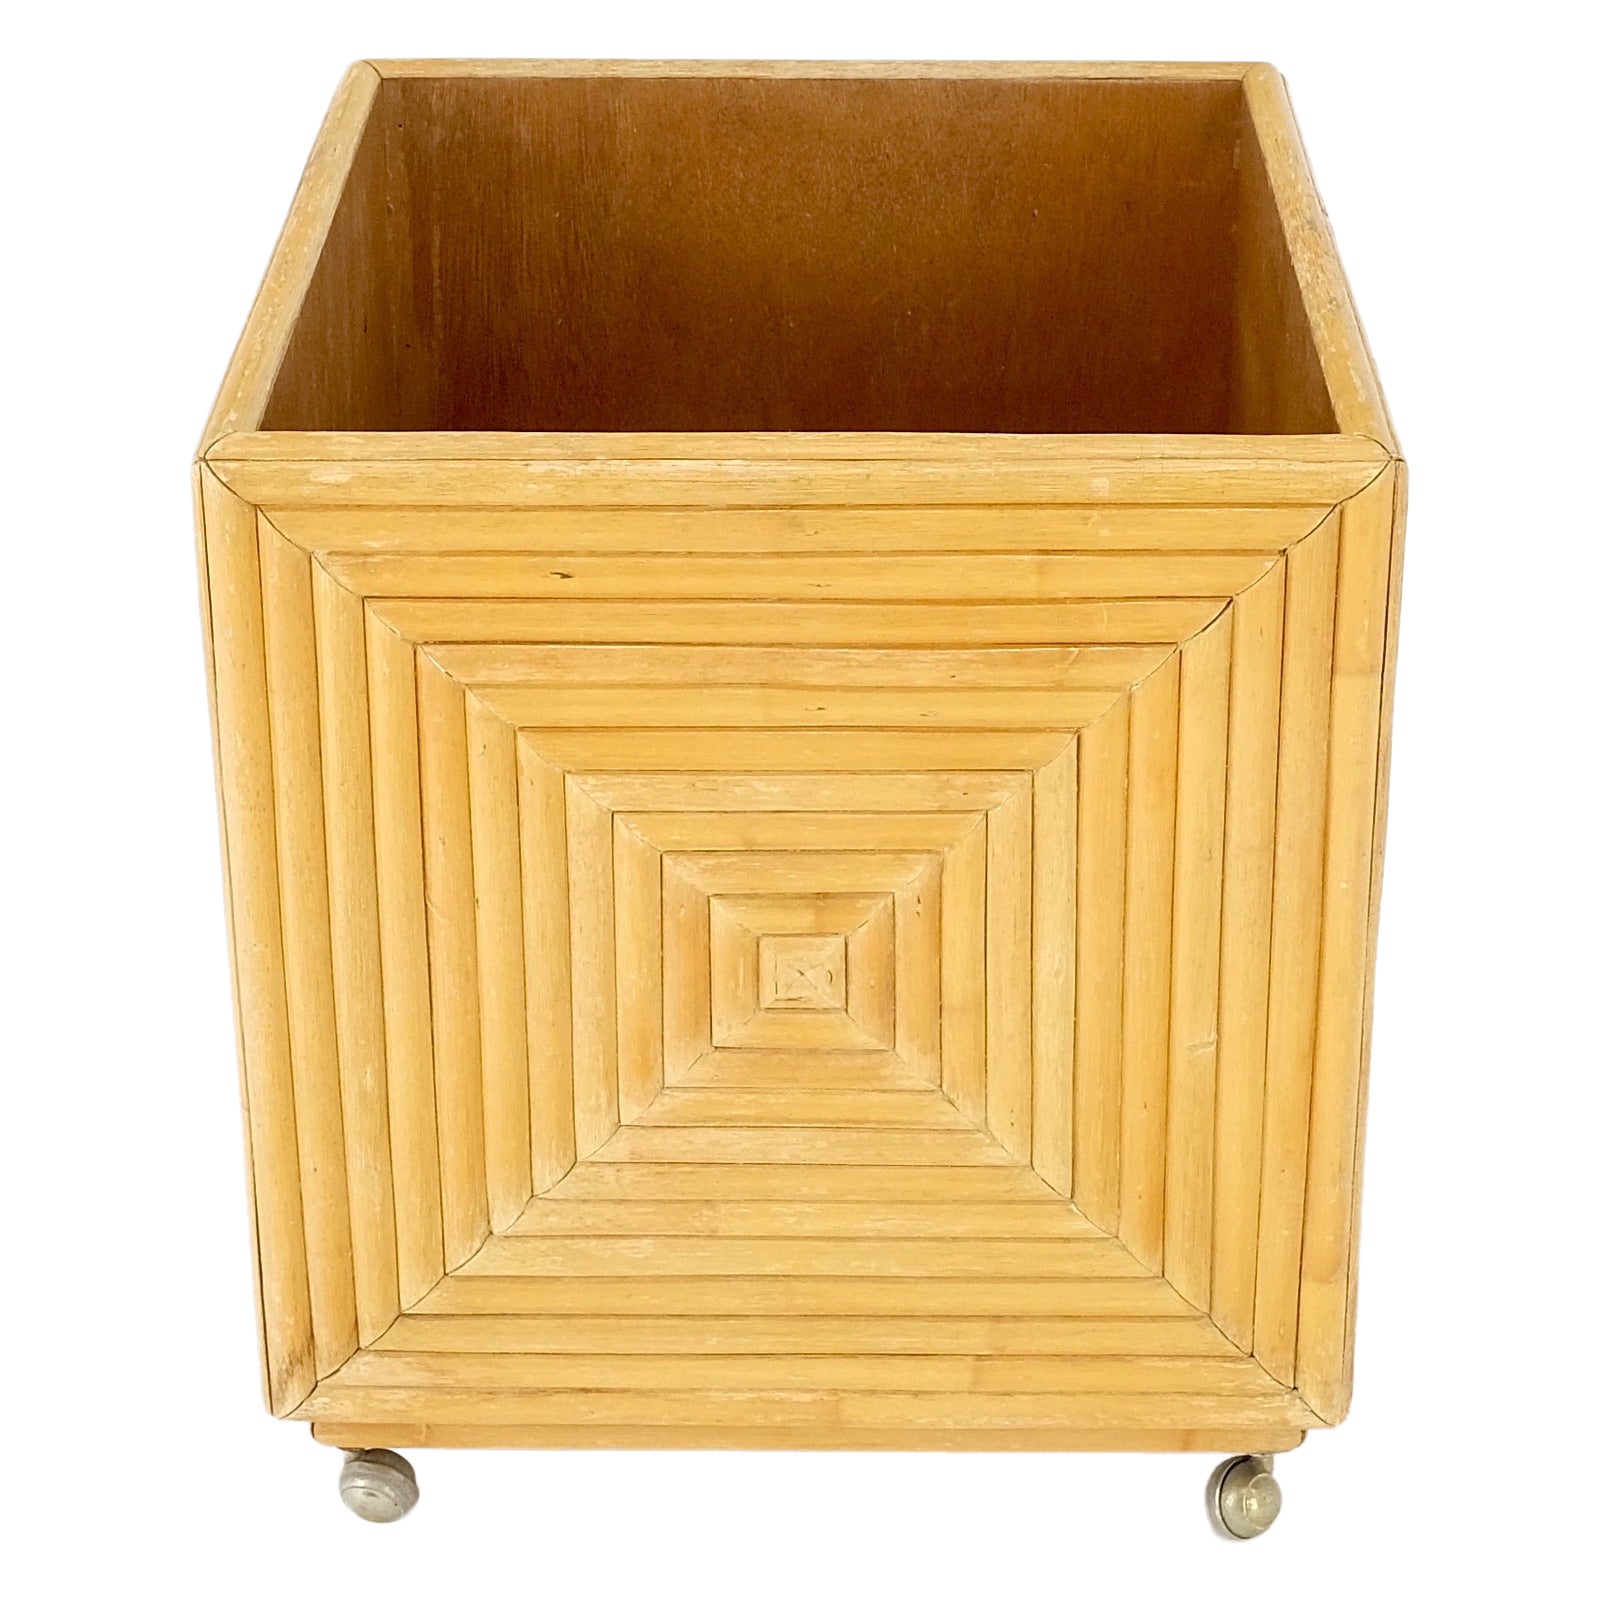 Mid-Century Modern Reed Bamboo Rattan Square Cube Shape Planter Stand on Wheels